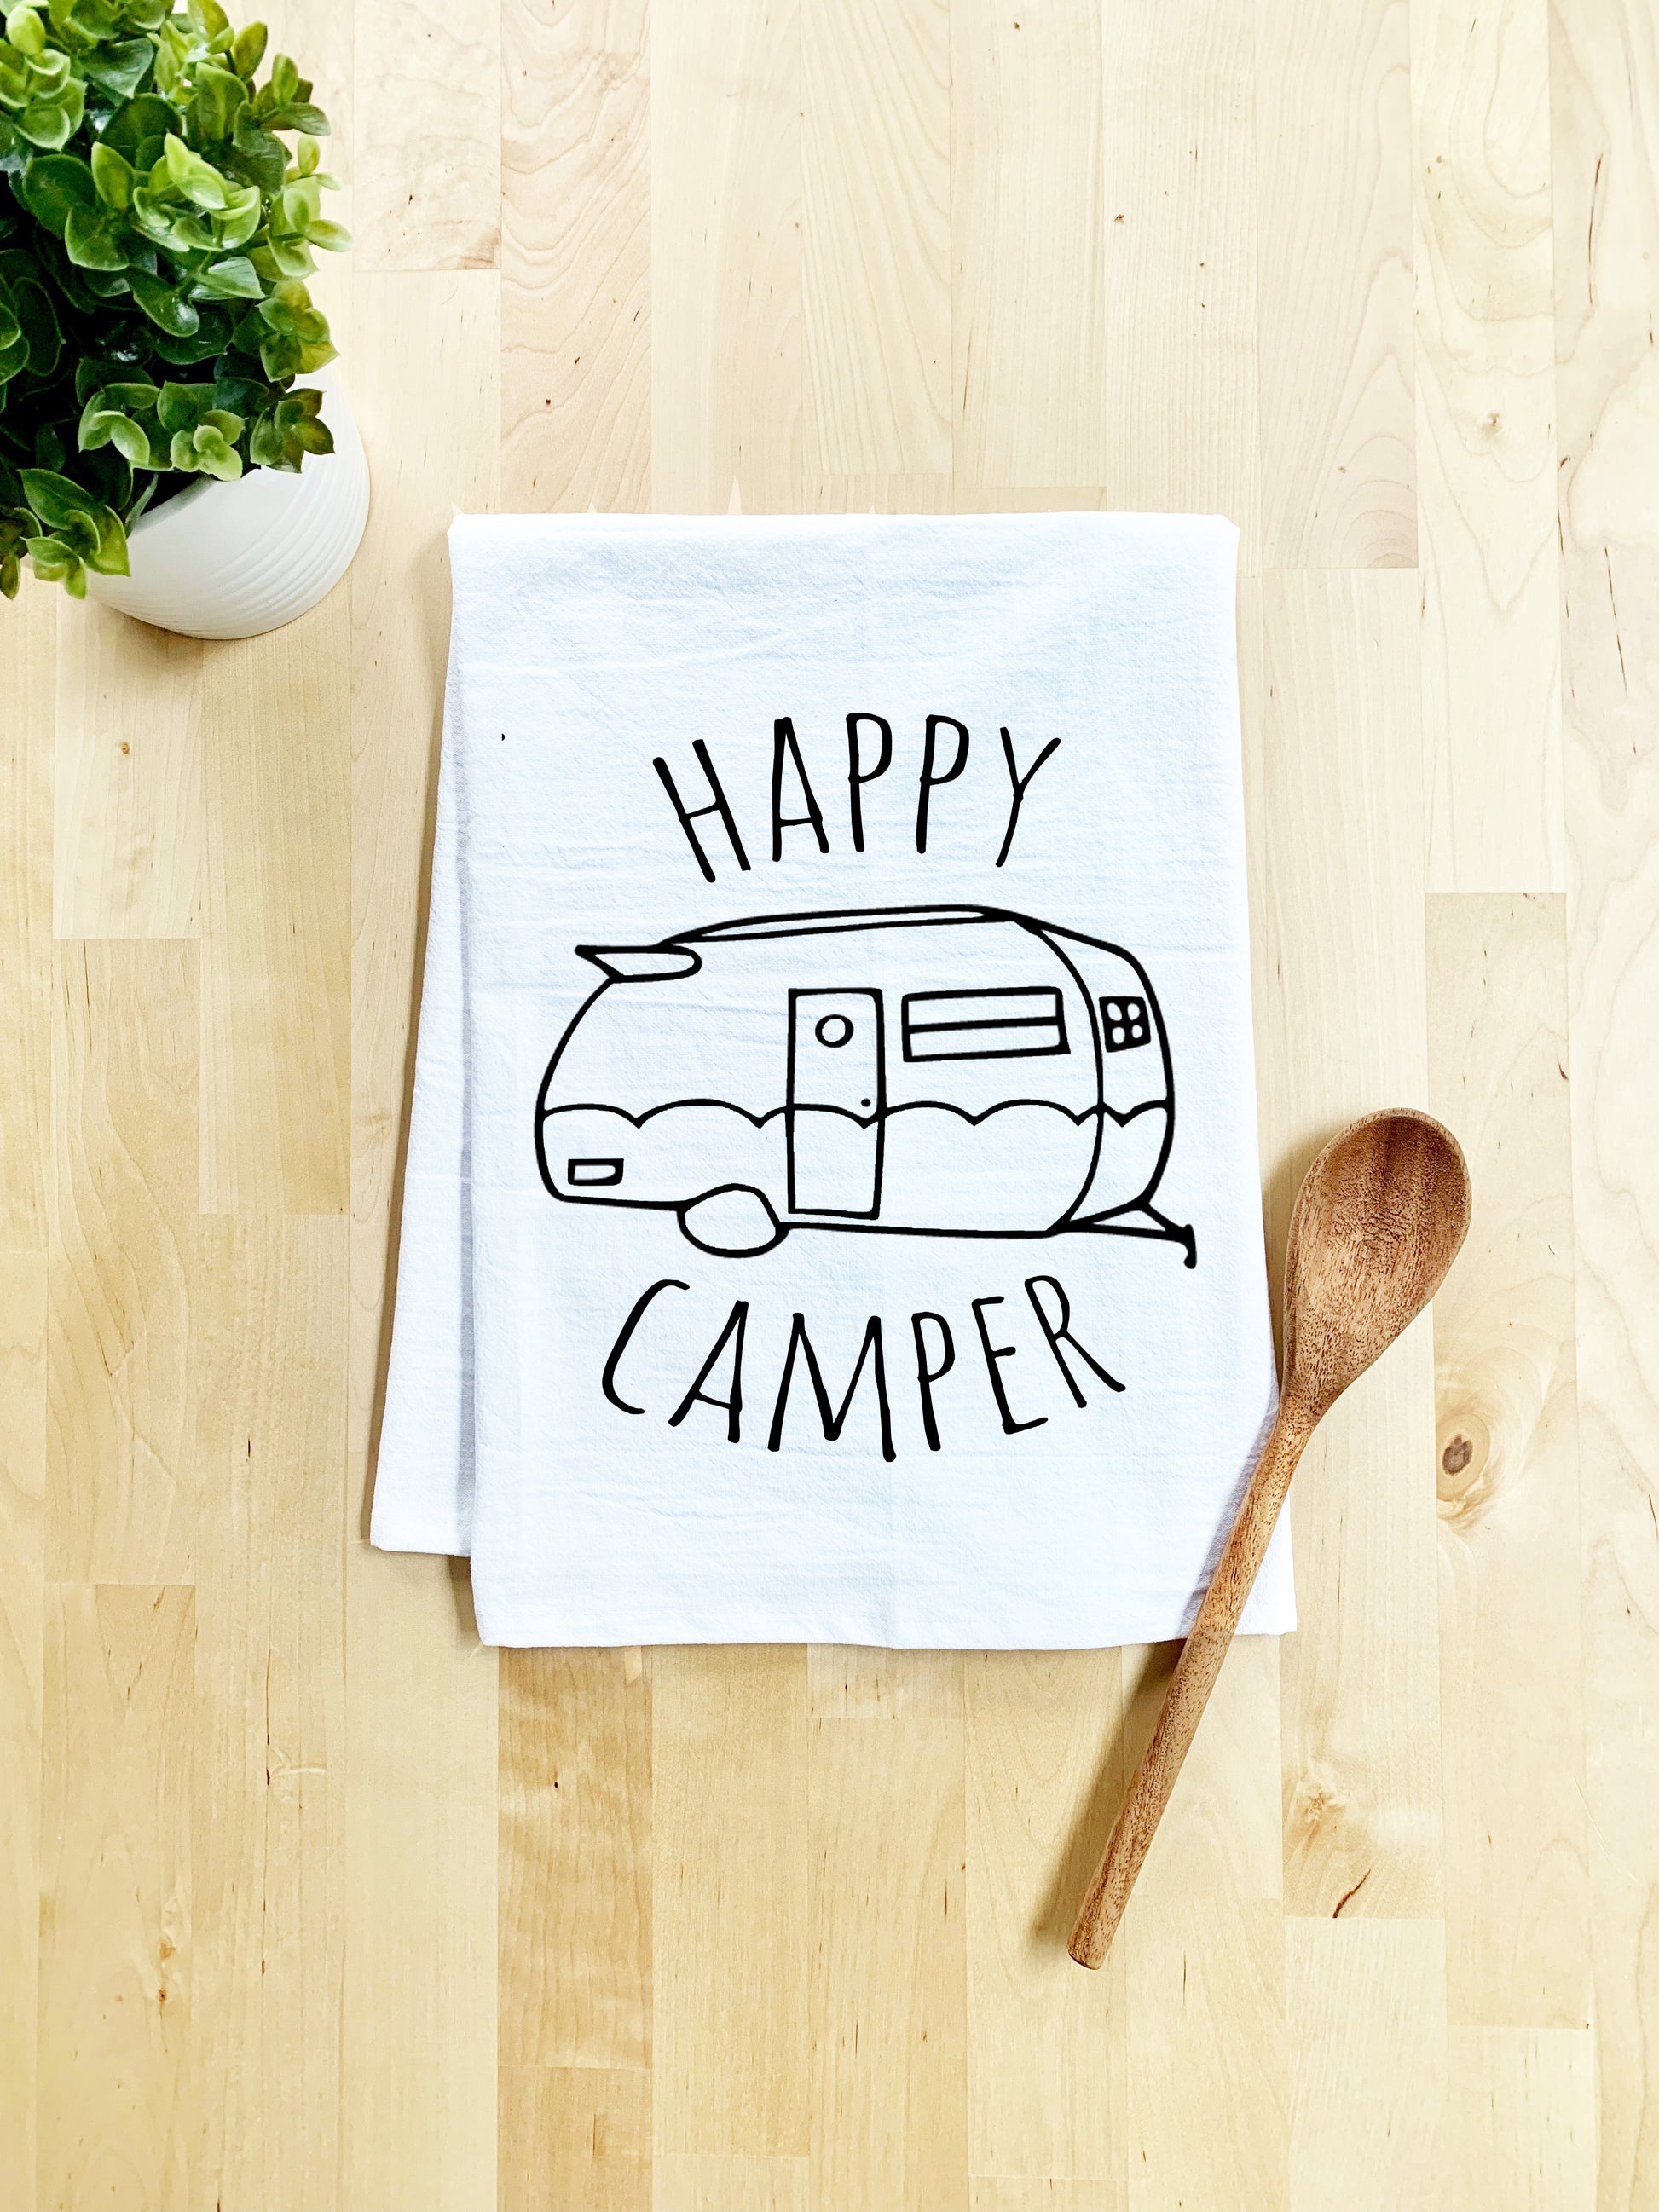 Camper Sweet Camper Dish Towel- Kitchen Towel for Camping - Larissa Made  This